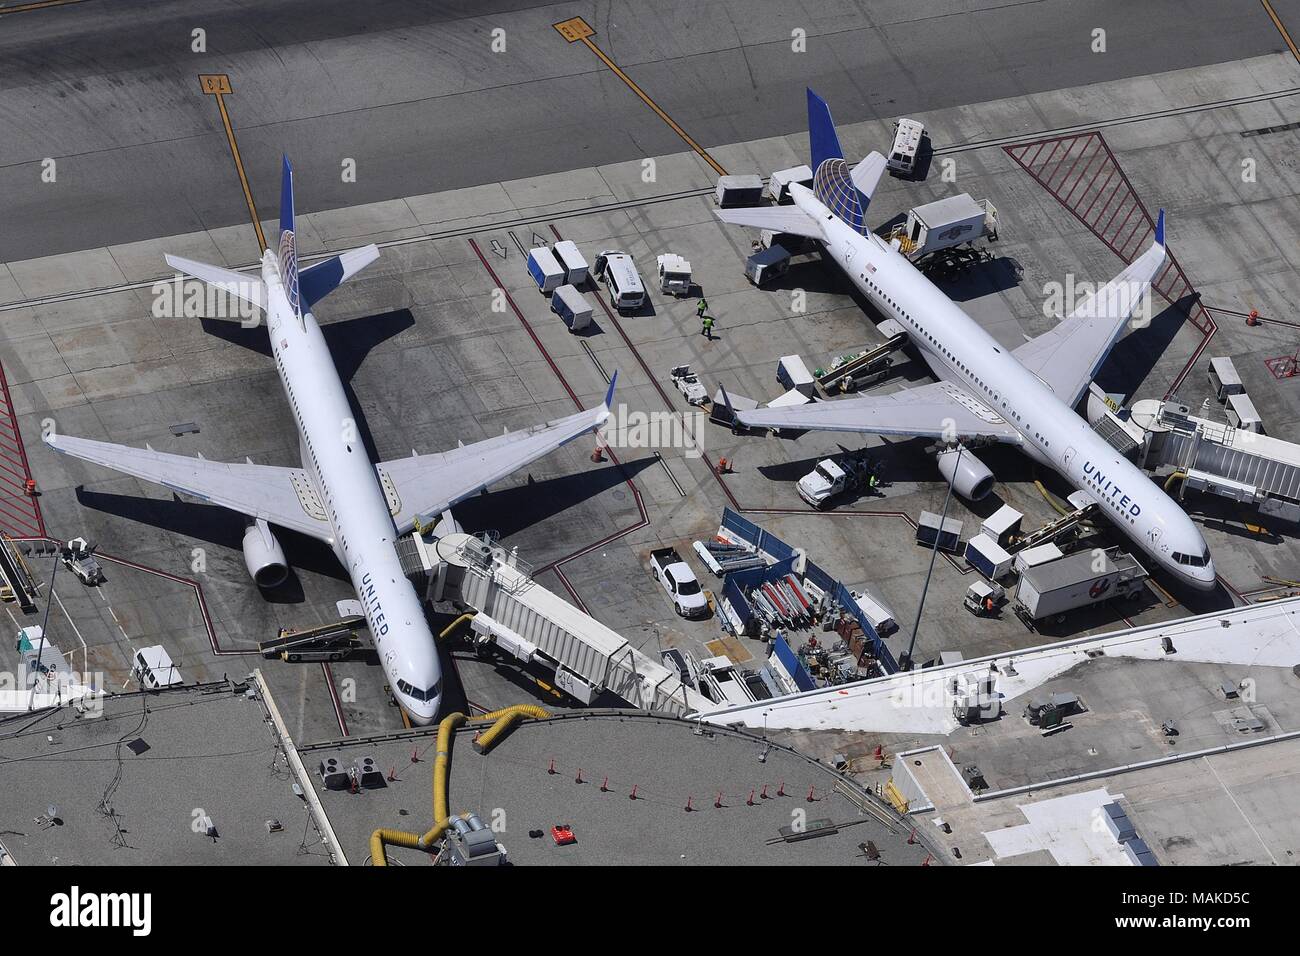 UNITED AIRLINES BOEING 757s AT TERMINAL 7 OF LAX, LOS ANGELES AIRPORT Stock Photo